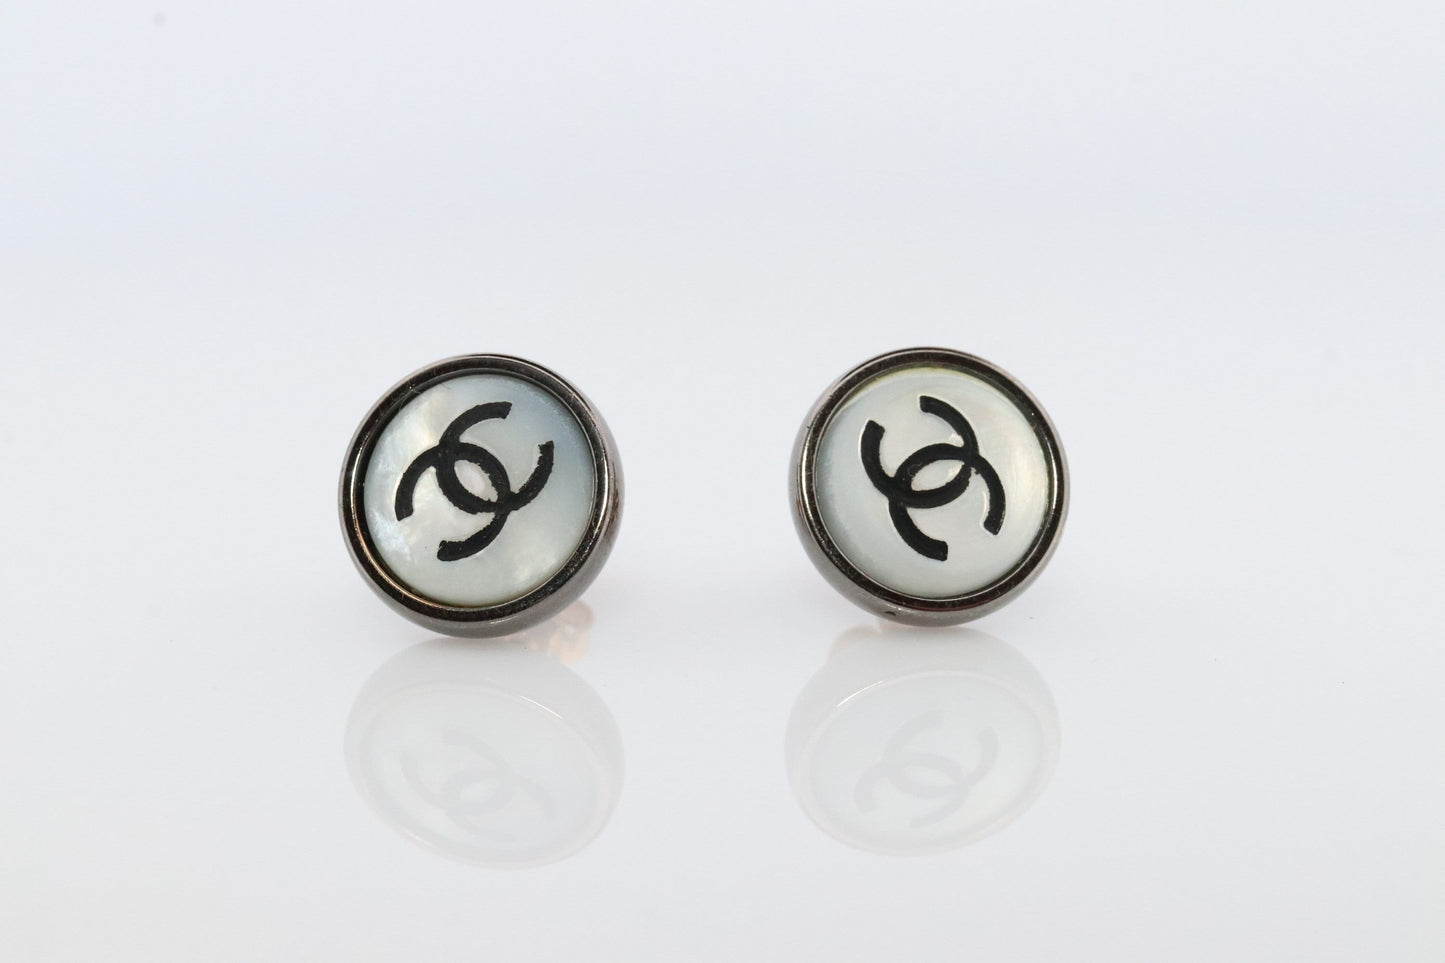 Chanel Earrings. Genuine White and Black MOP CHANEL round LOGO earrings. Stud earrings. Stud buttons.